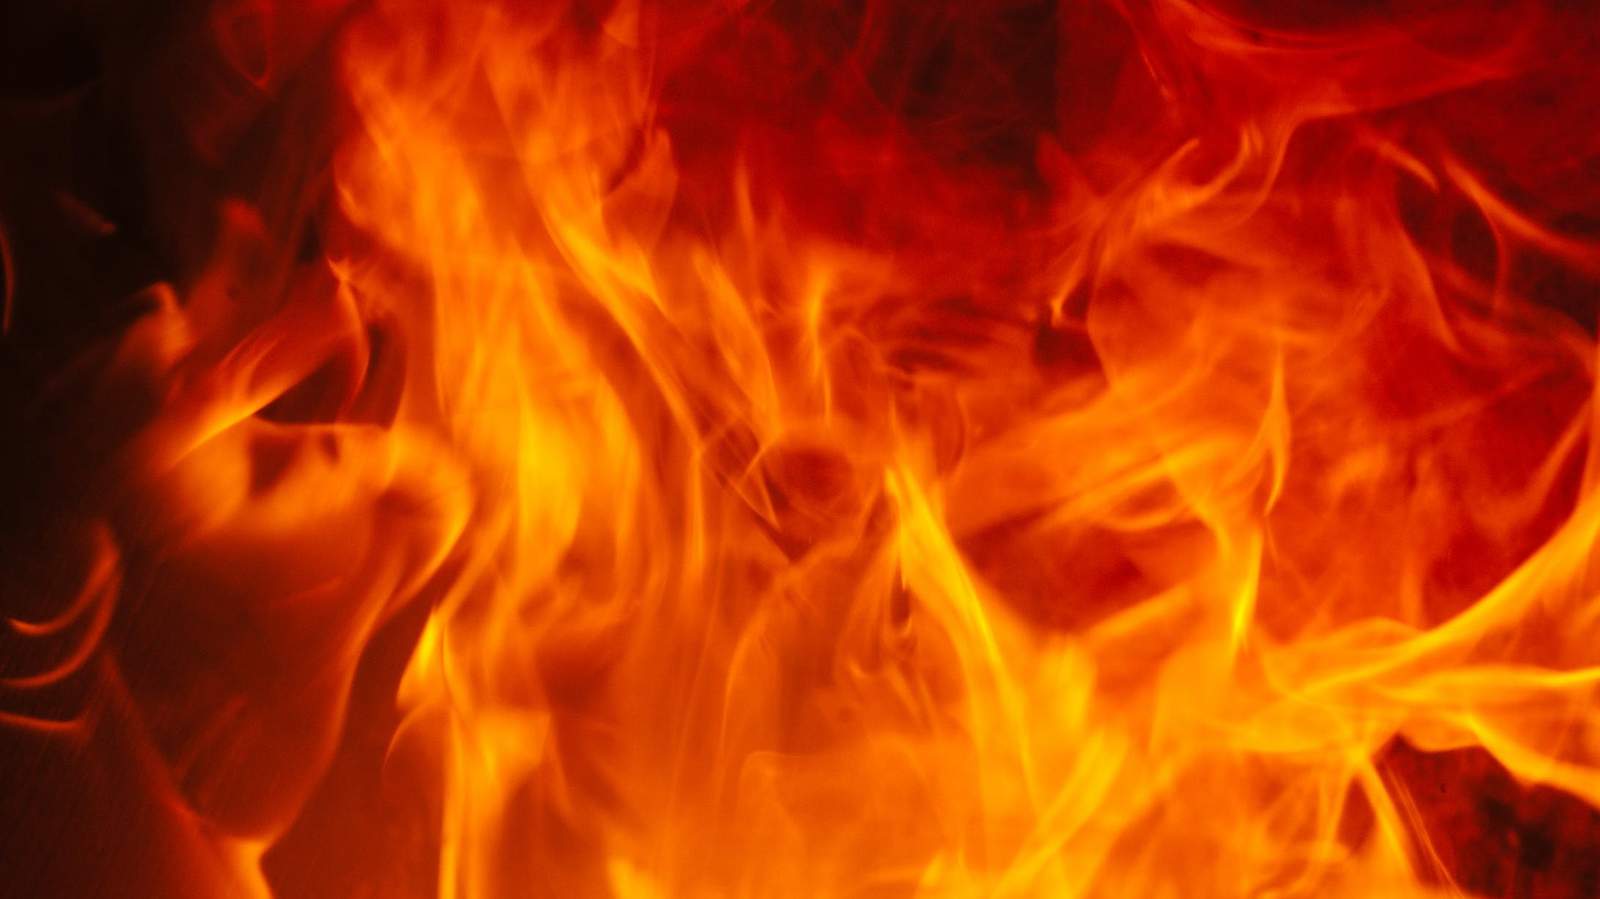 Seven displaced after early morning house fire in Danville